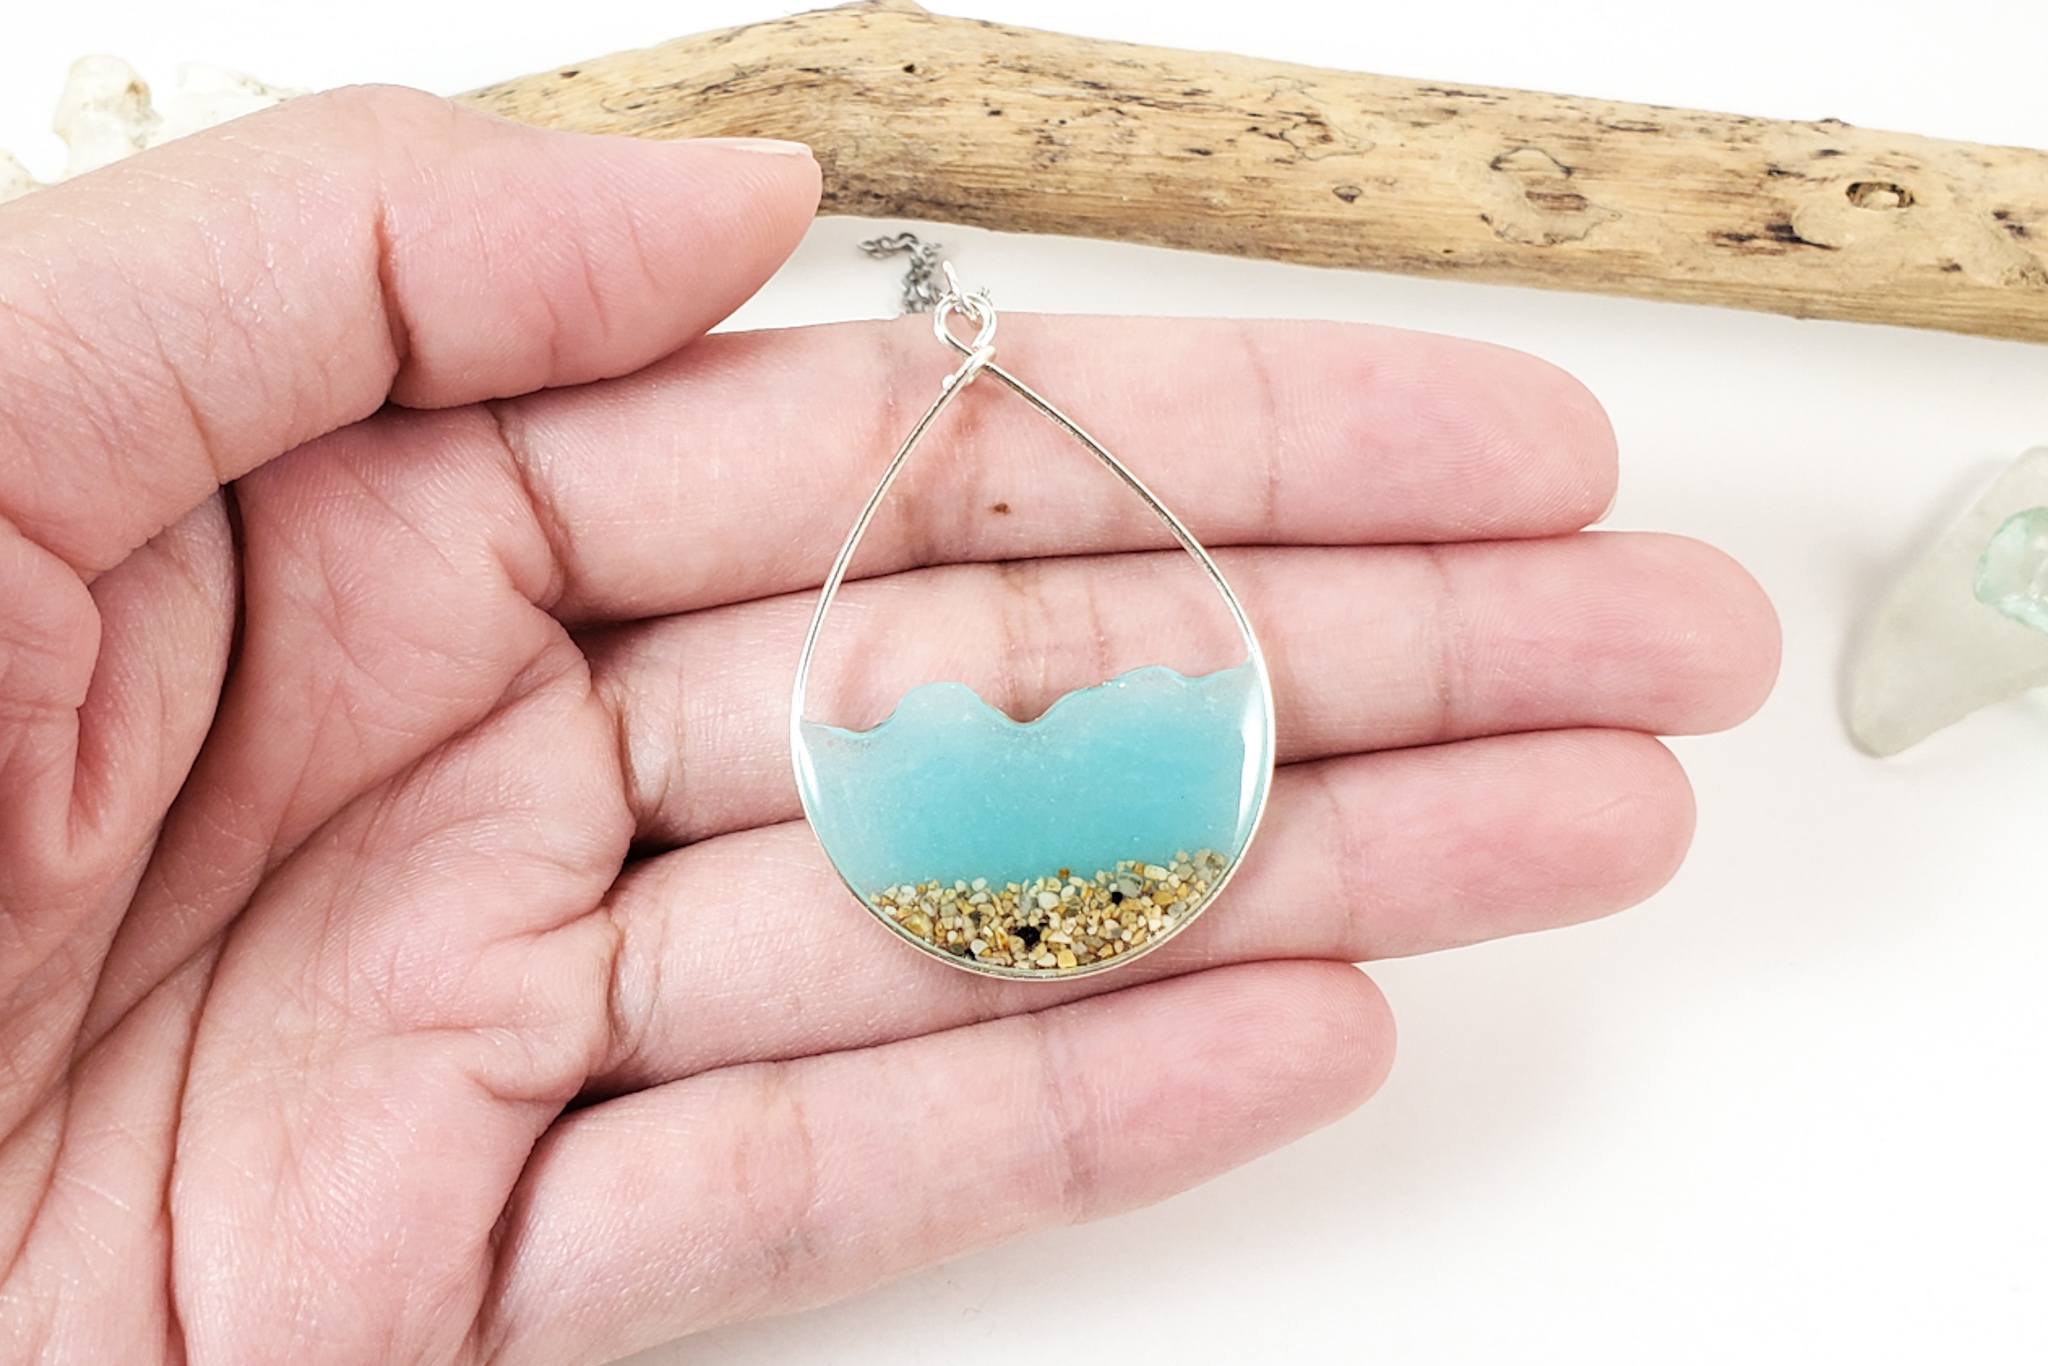 Aqua glow in the dark water and sand teardrop earrings and necklace ...